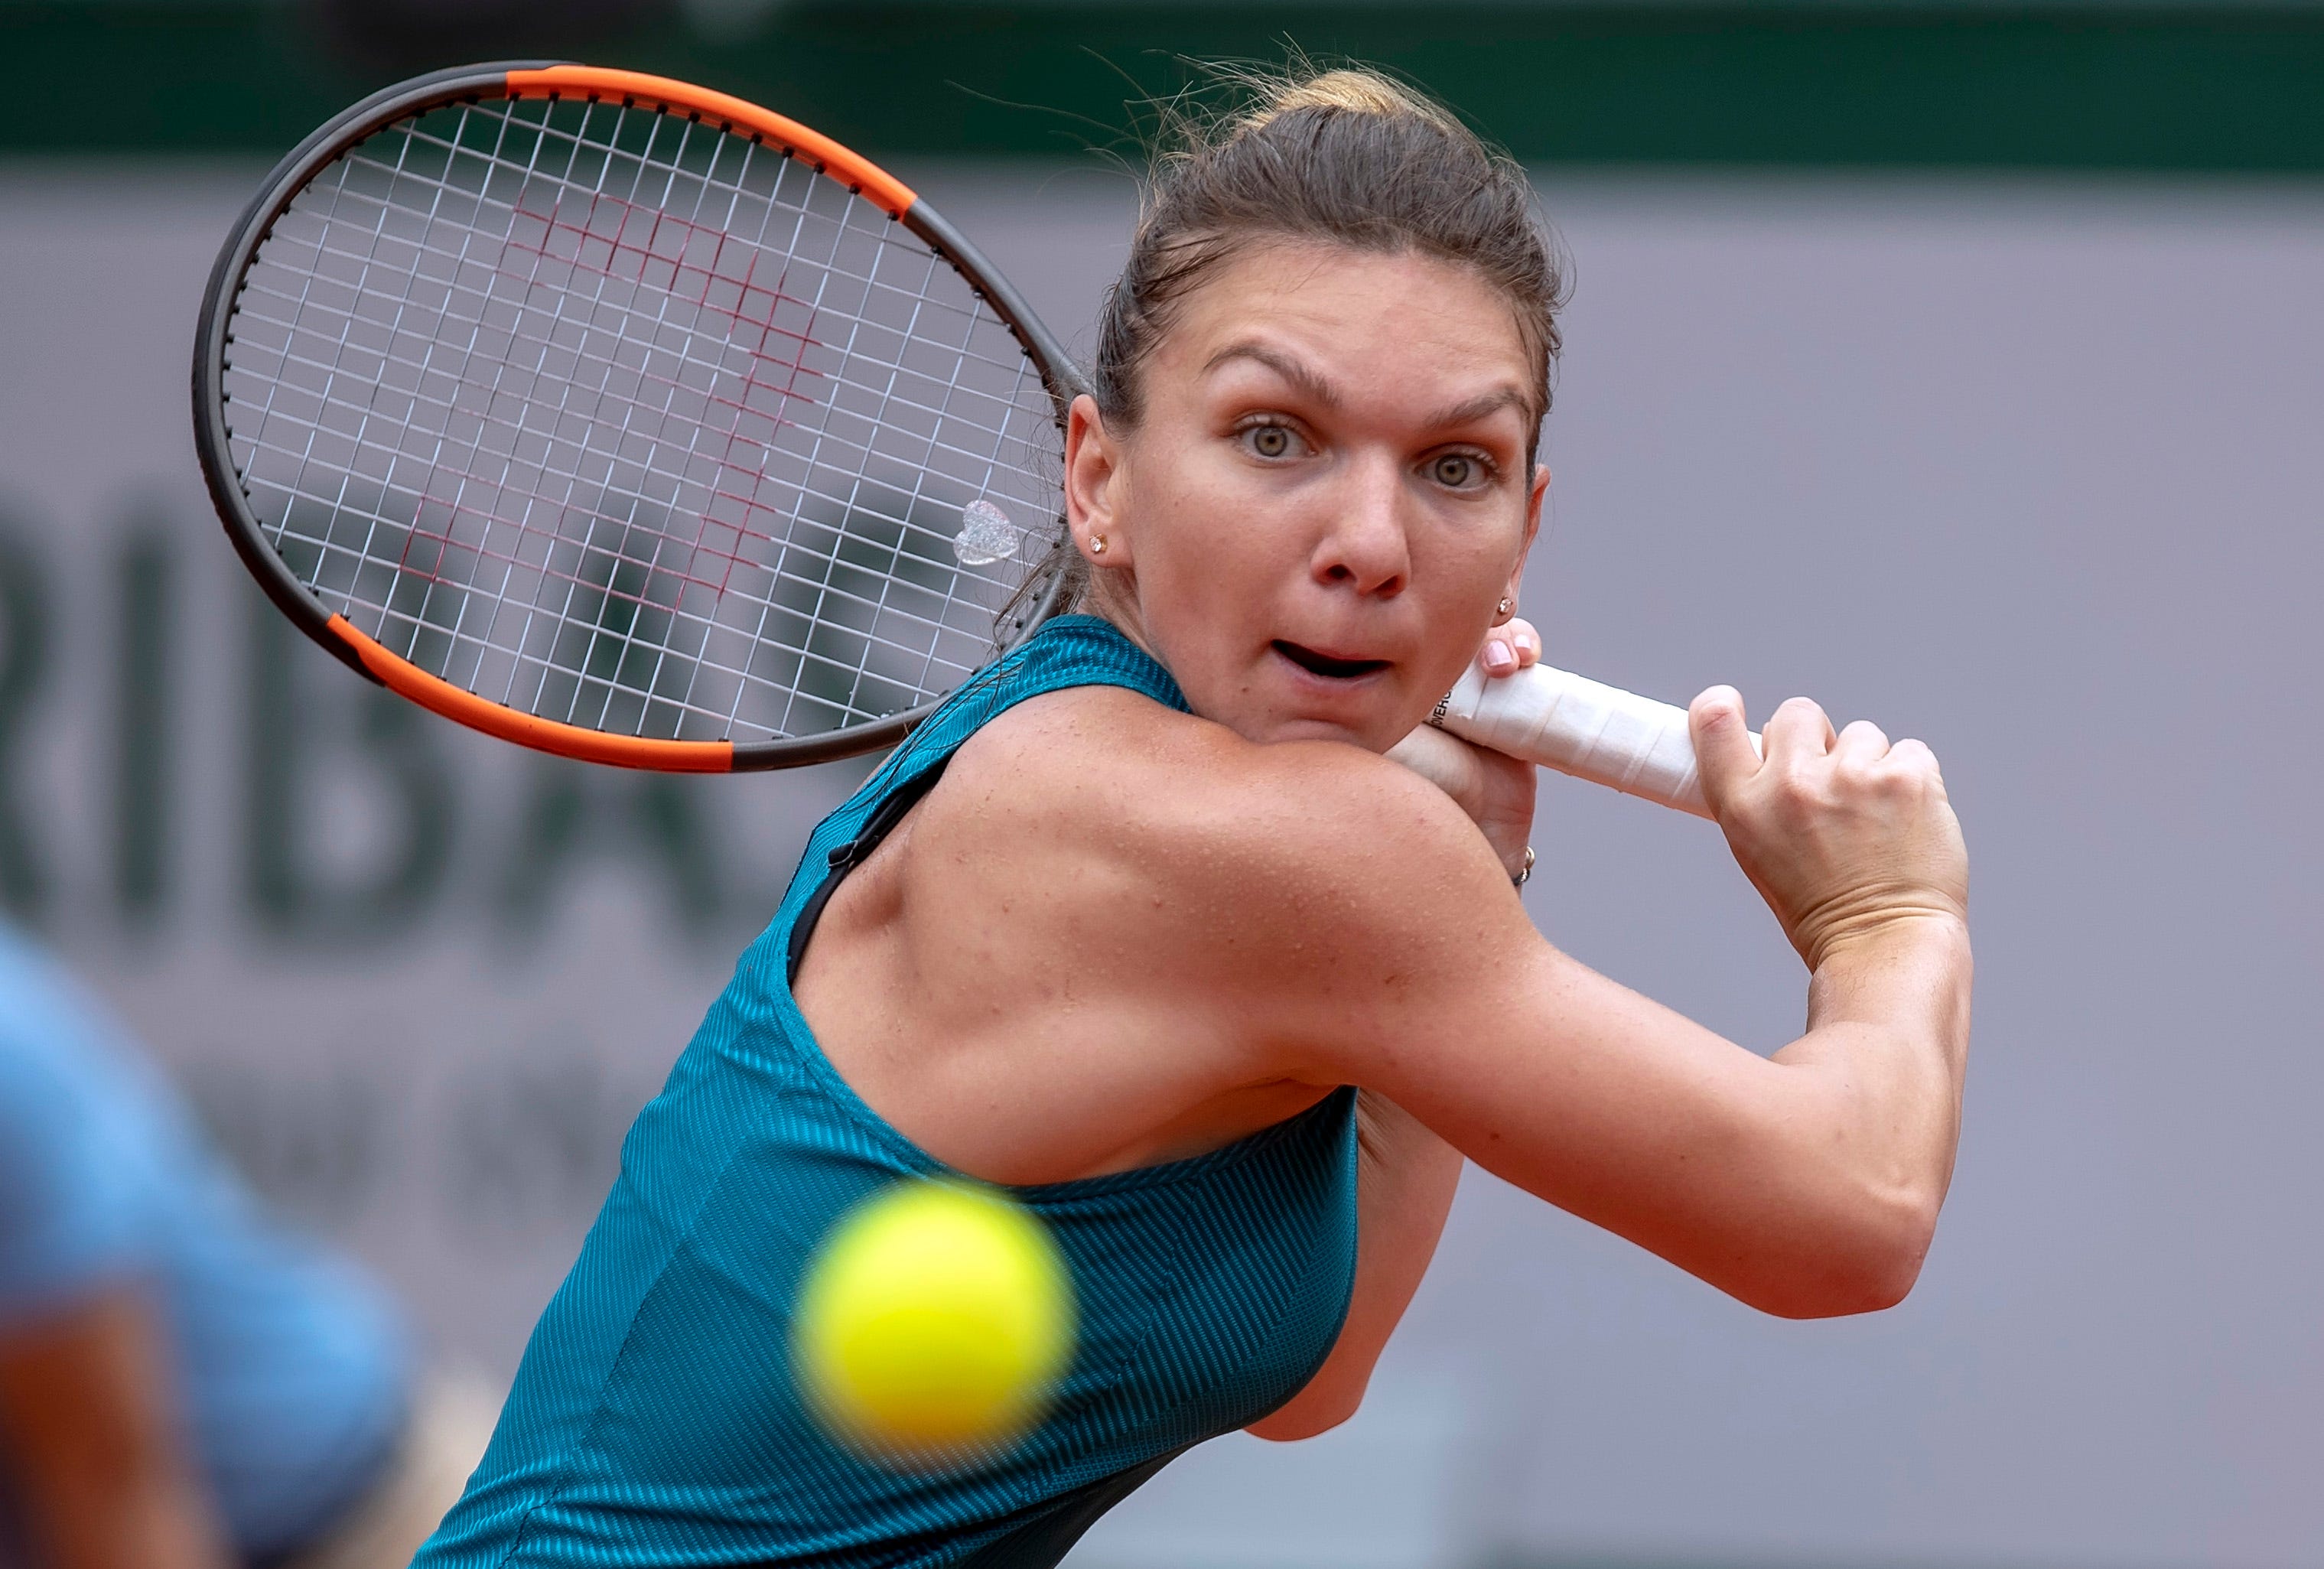 Simona Halep (ROU) in action during her match against Alison Riske (USA) on day four of the 2018 French Open in Paris.